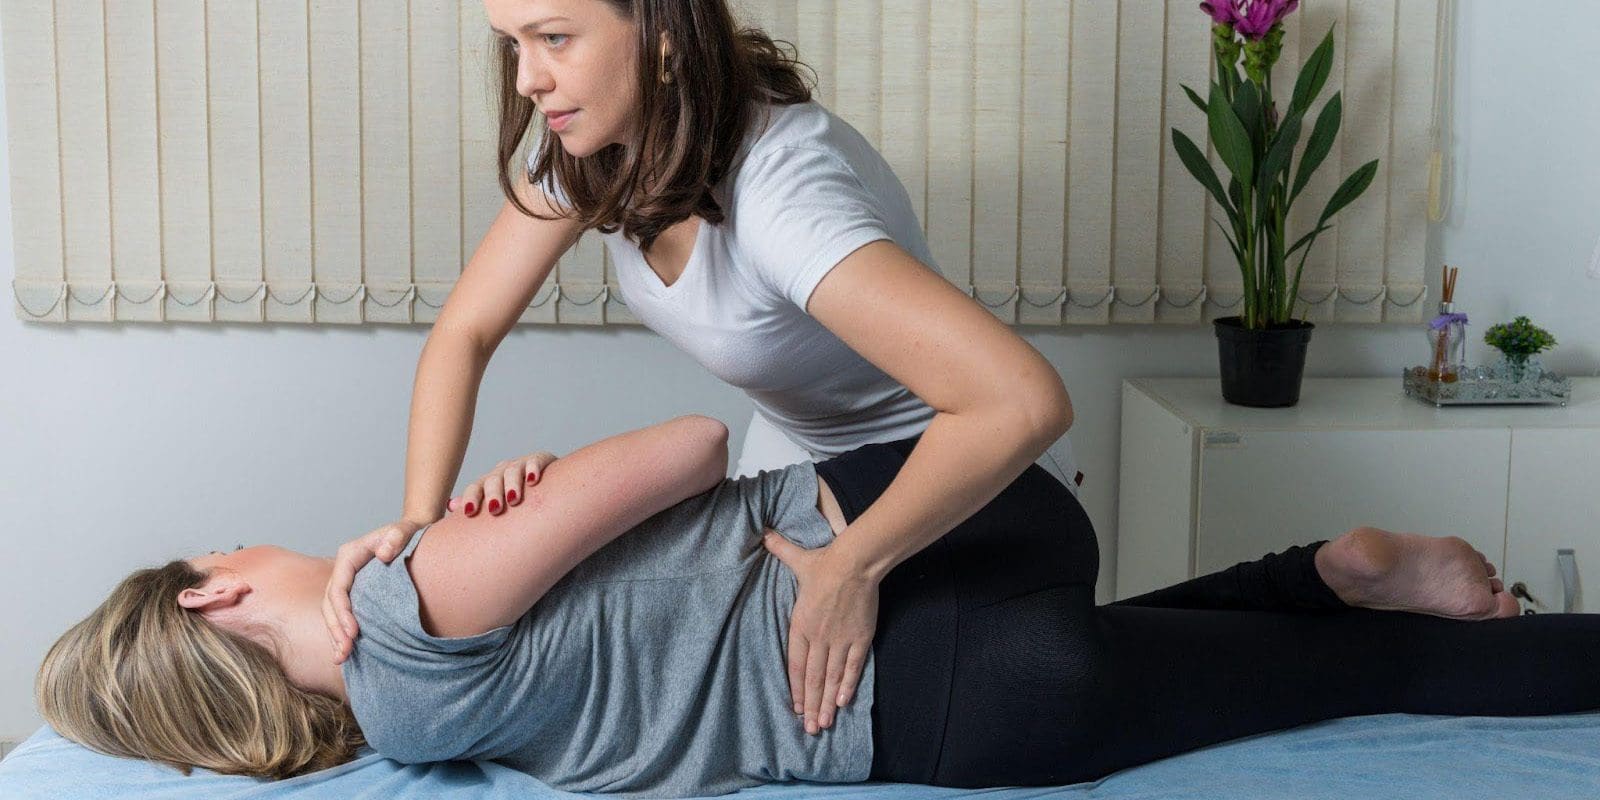 Chiropractor working on a young woman's lower back.